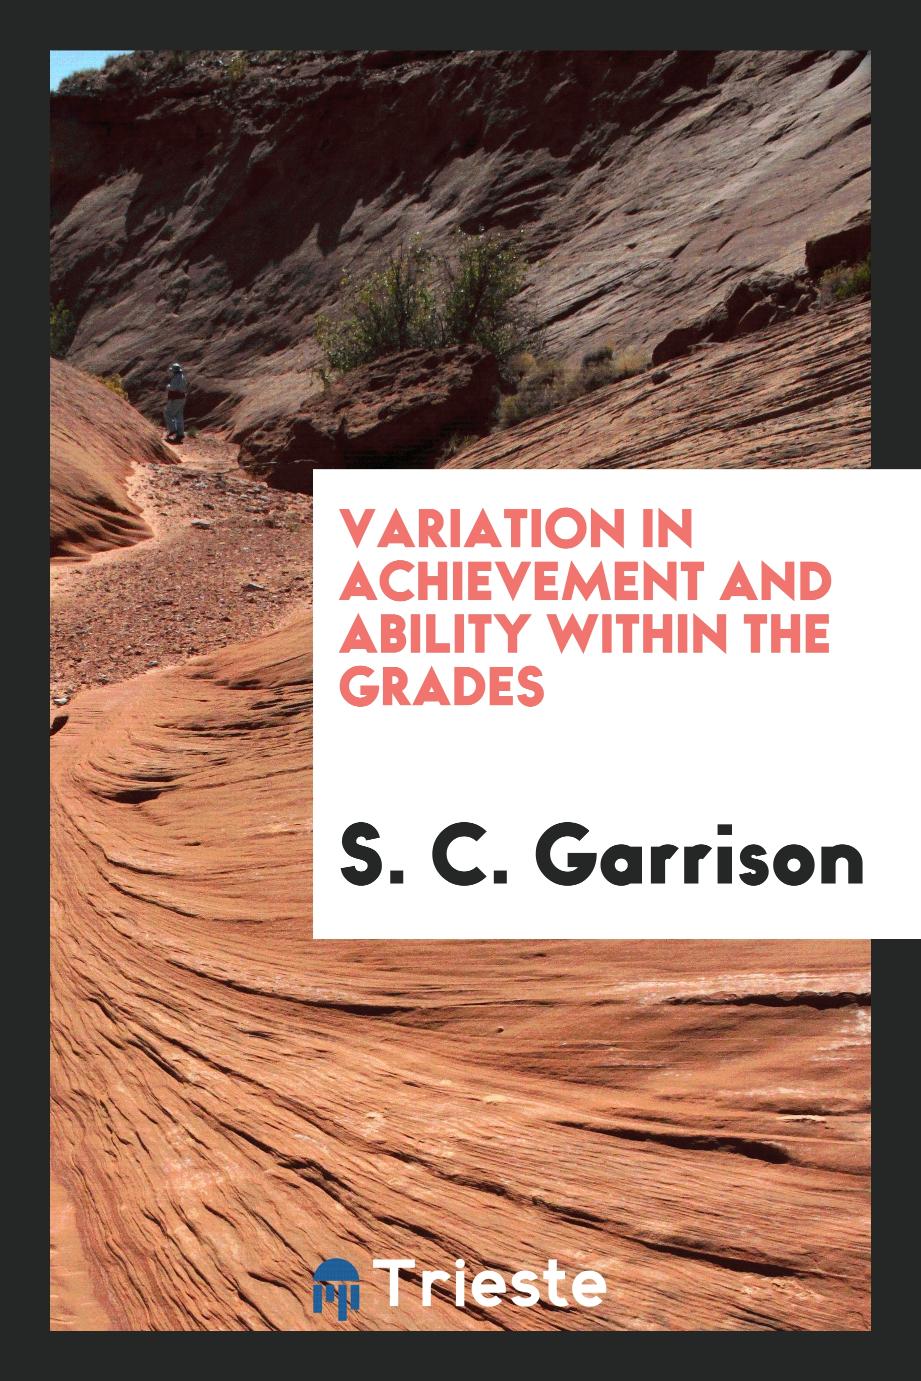 Variation in achievement and ability within the grades